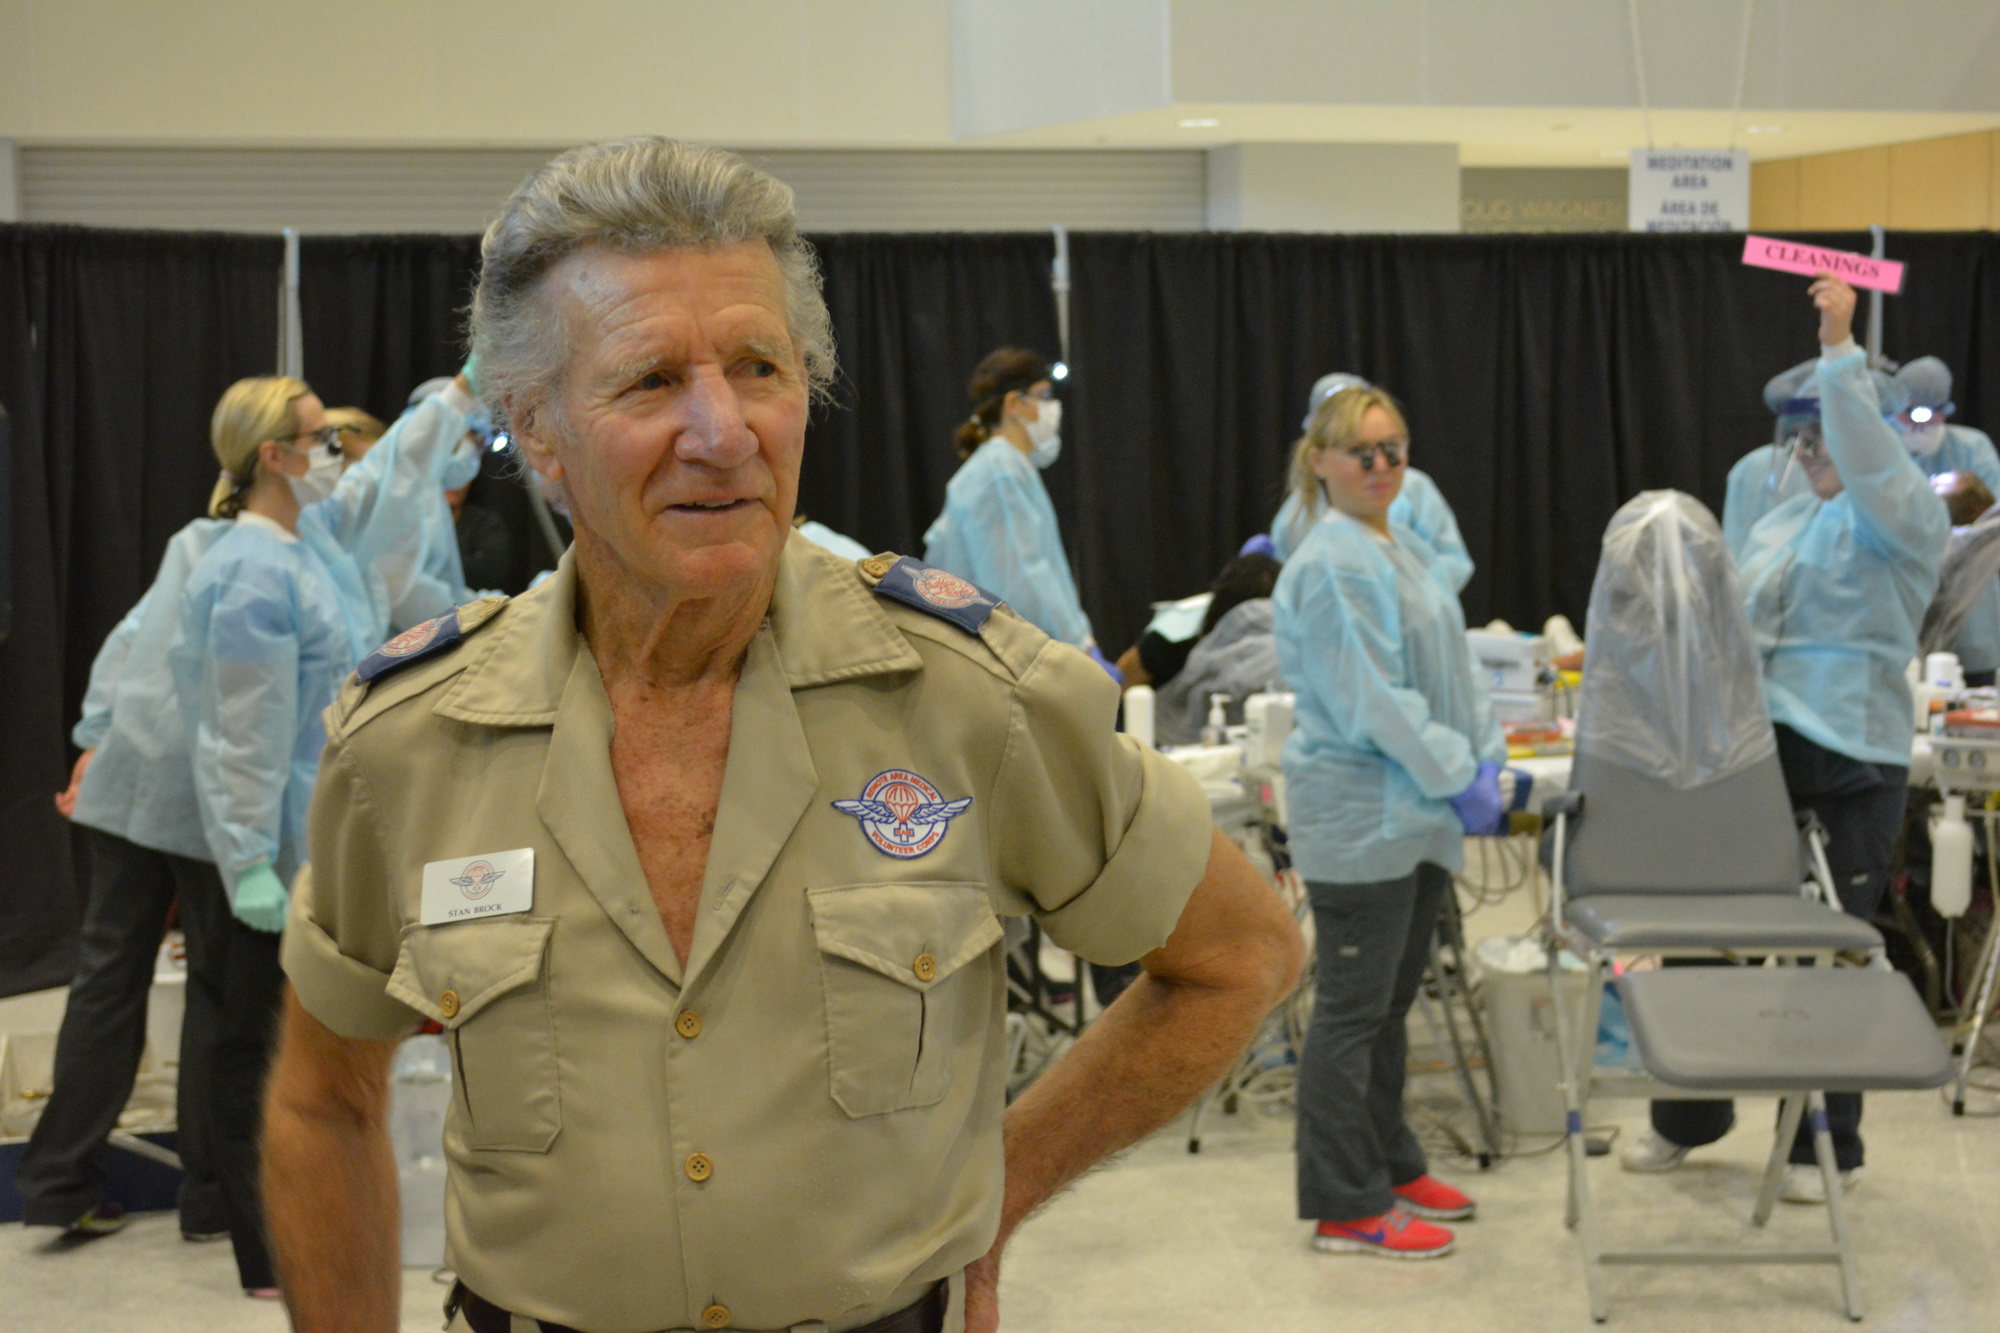 Stan Brock, founder of Remote Area Medical, tours the floor of Manatee Technical College in Bradenton on Saturday as patients in the background receive dental care.